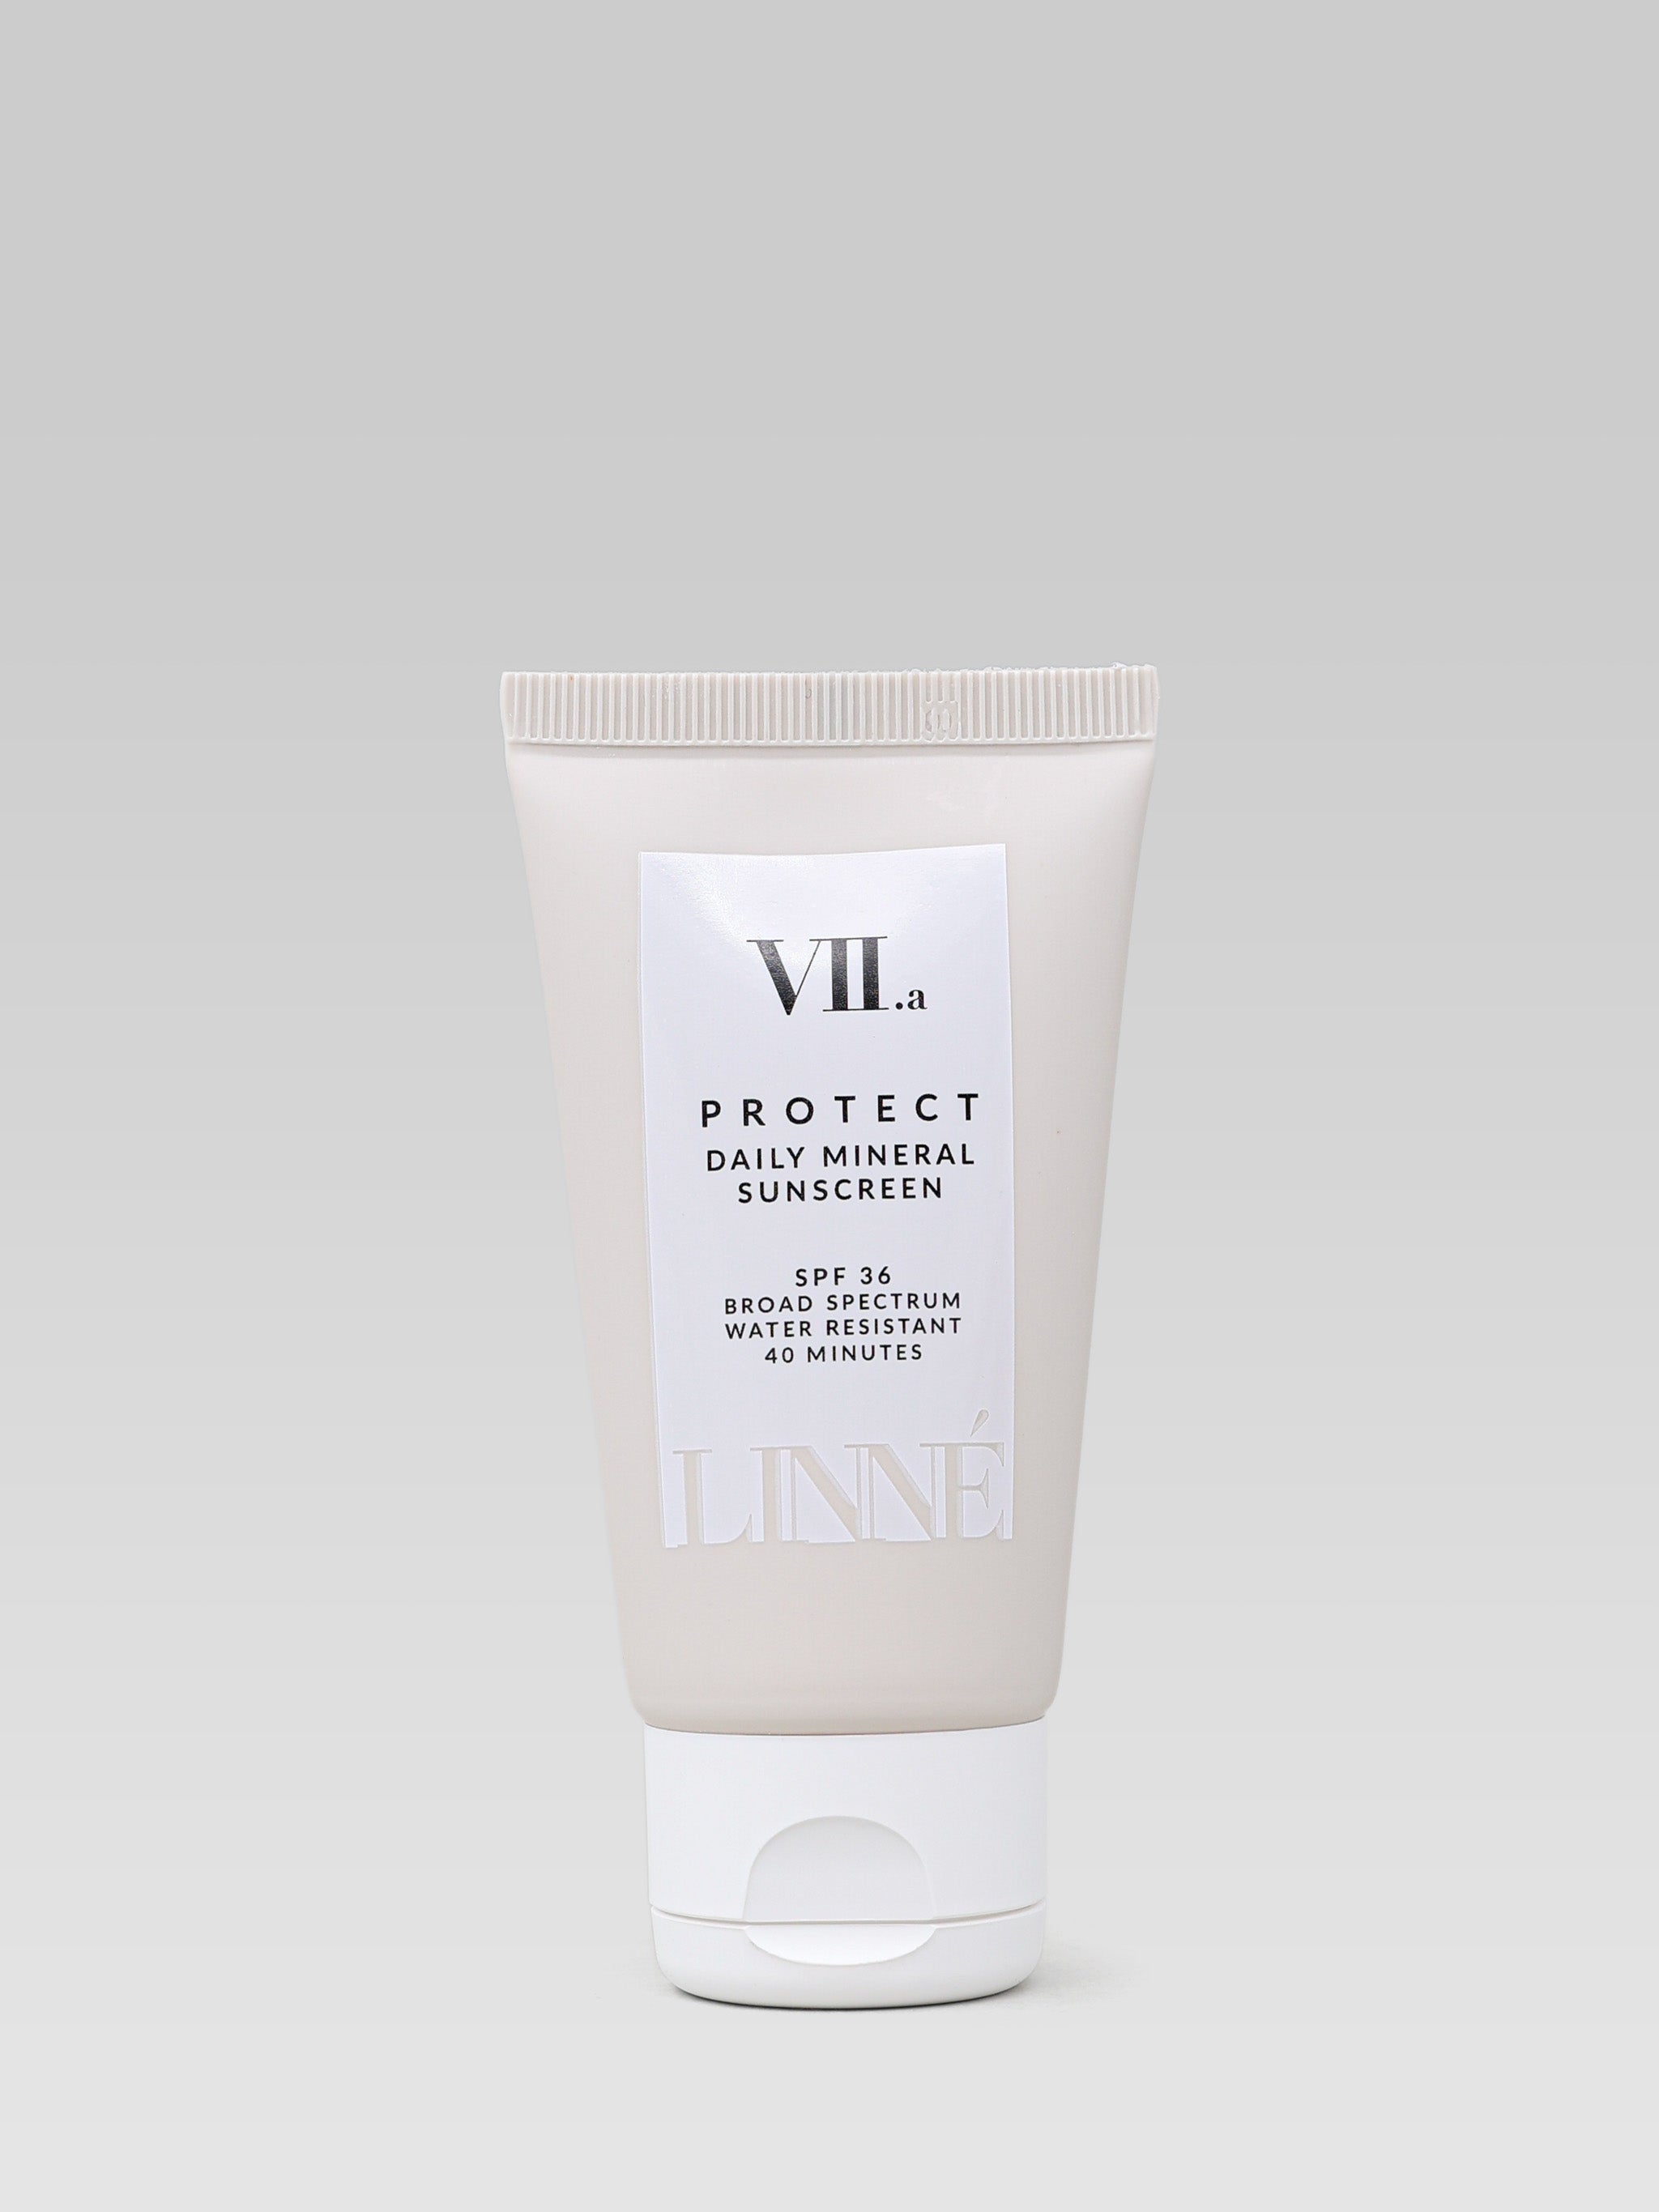 LINNE BOTANICALS Protect Daily Mineral Sunscreen product shot